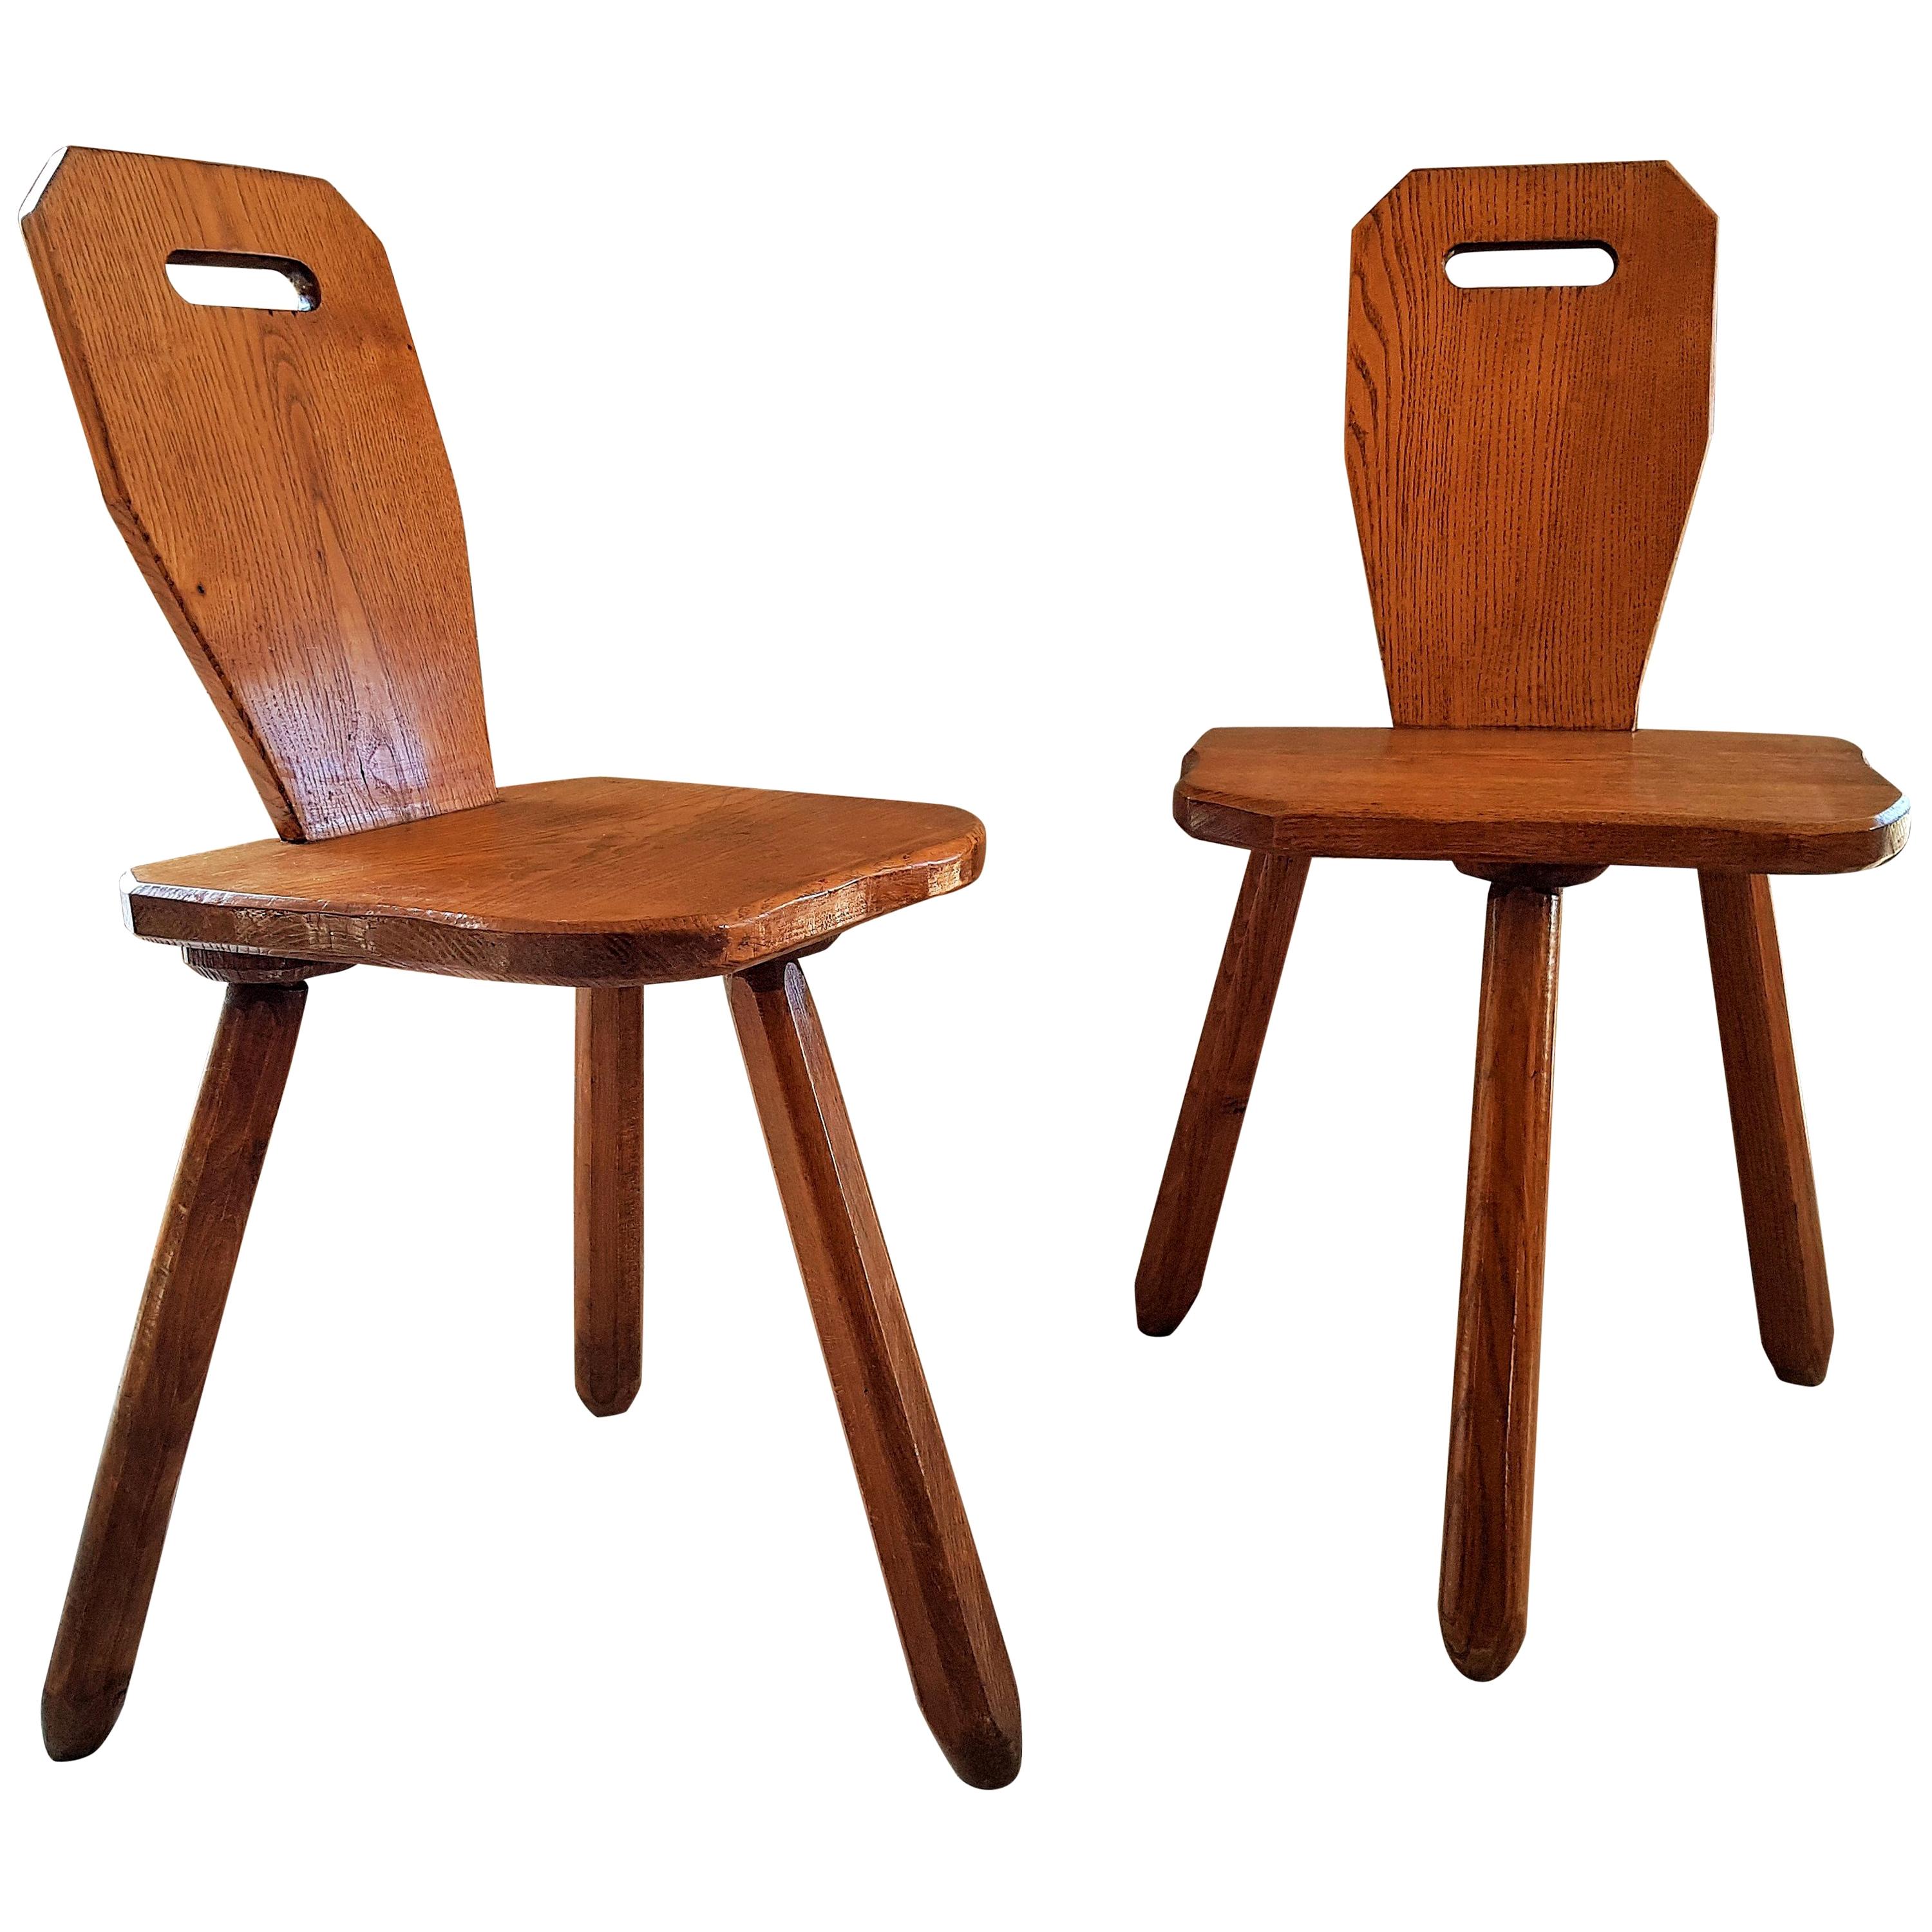 Midcentury primitive rustic Pair of Chairs Stools Style Perriand Les Arcs, 1950s